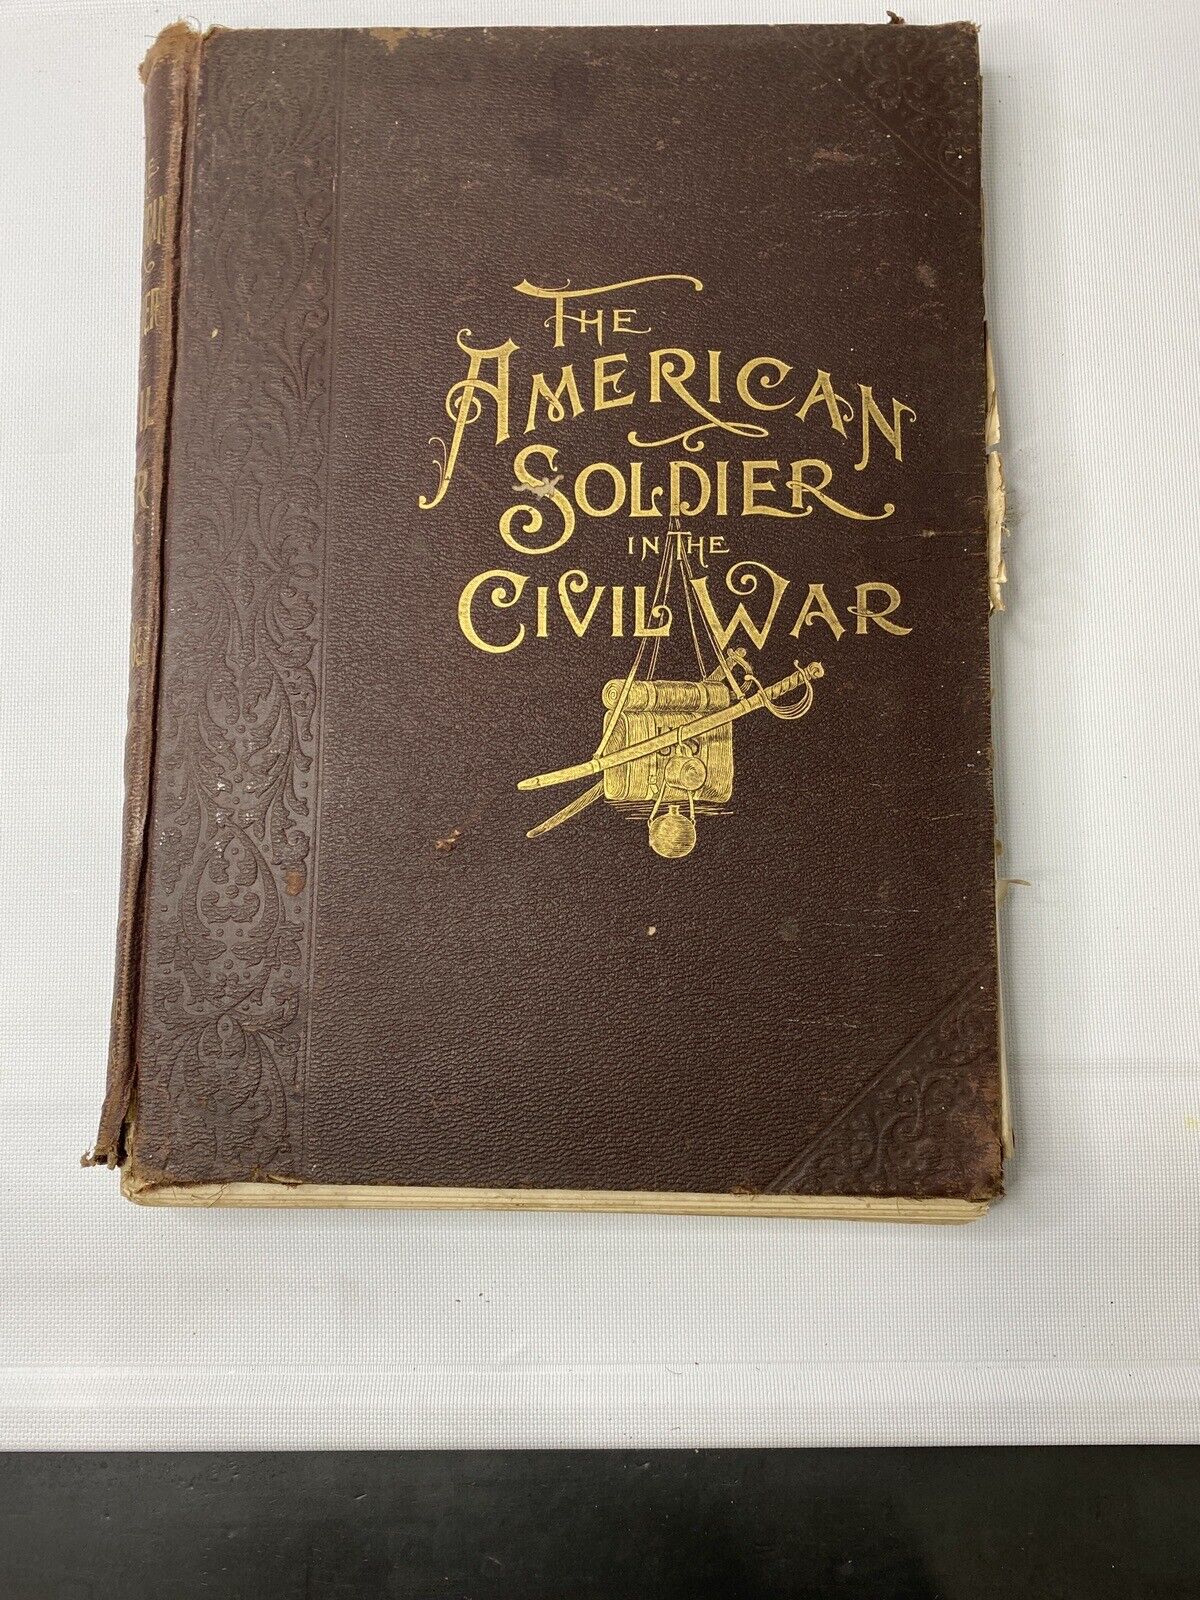 Leslie’s THE AMERICAN SOLDIER IN CIVIL WAR-Vtg 1895 Illustrated Military History